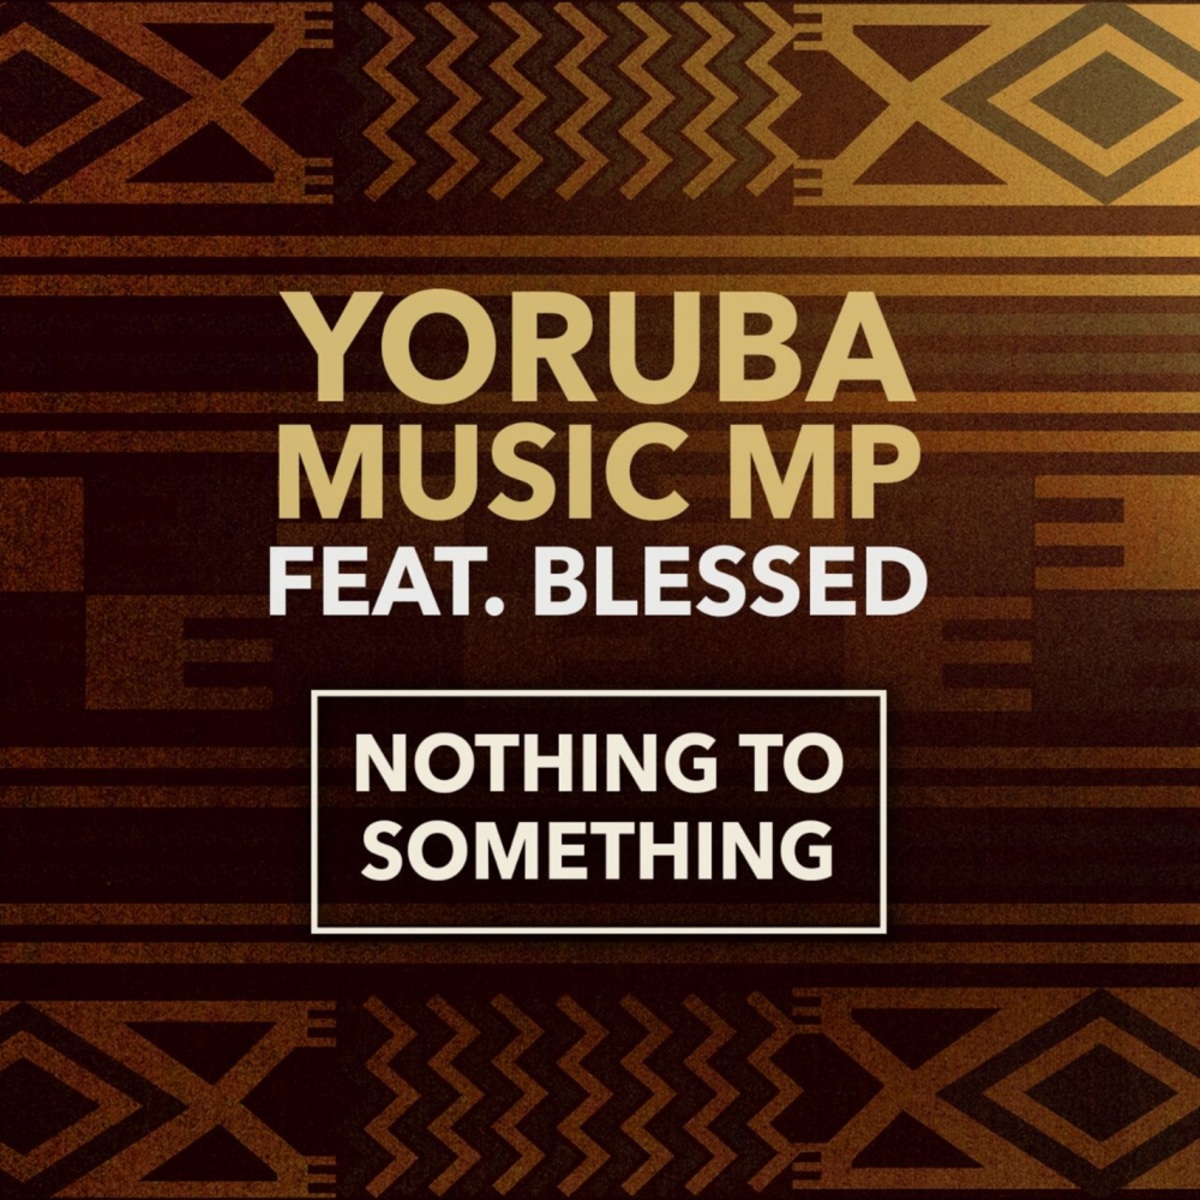 Yoruba Music Mp - Nothing To Something / STM Records